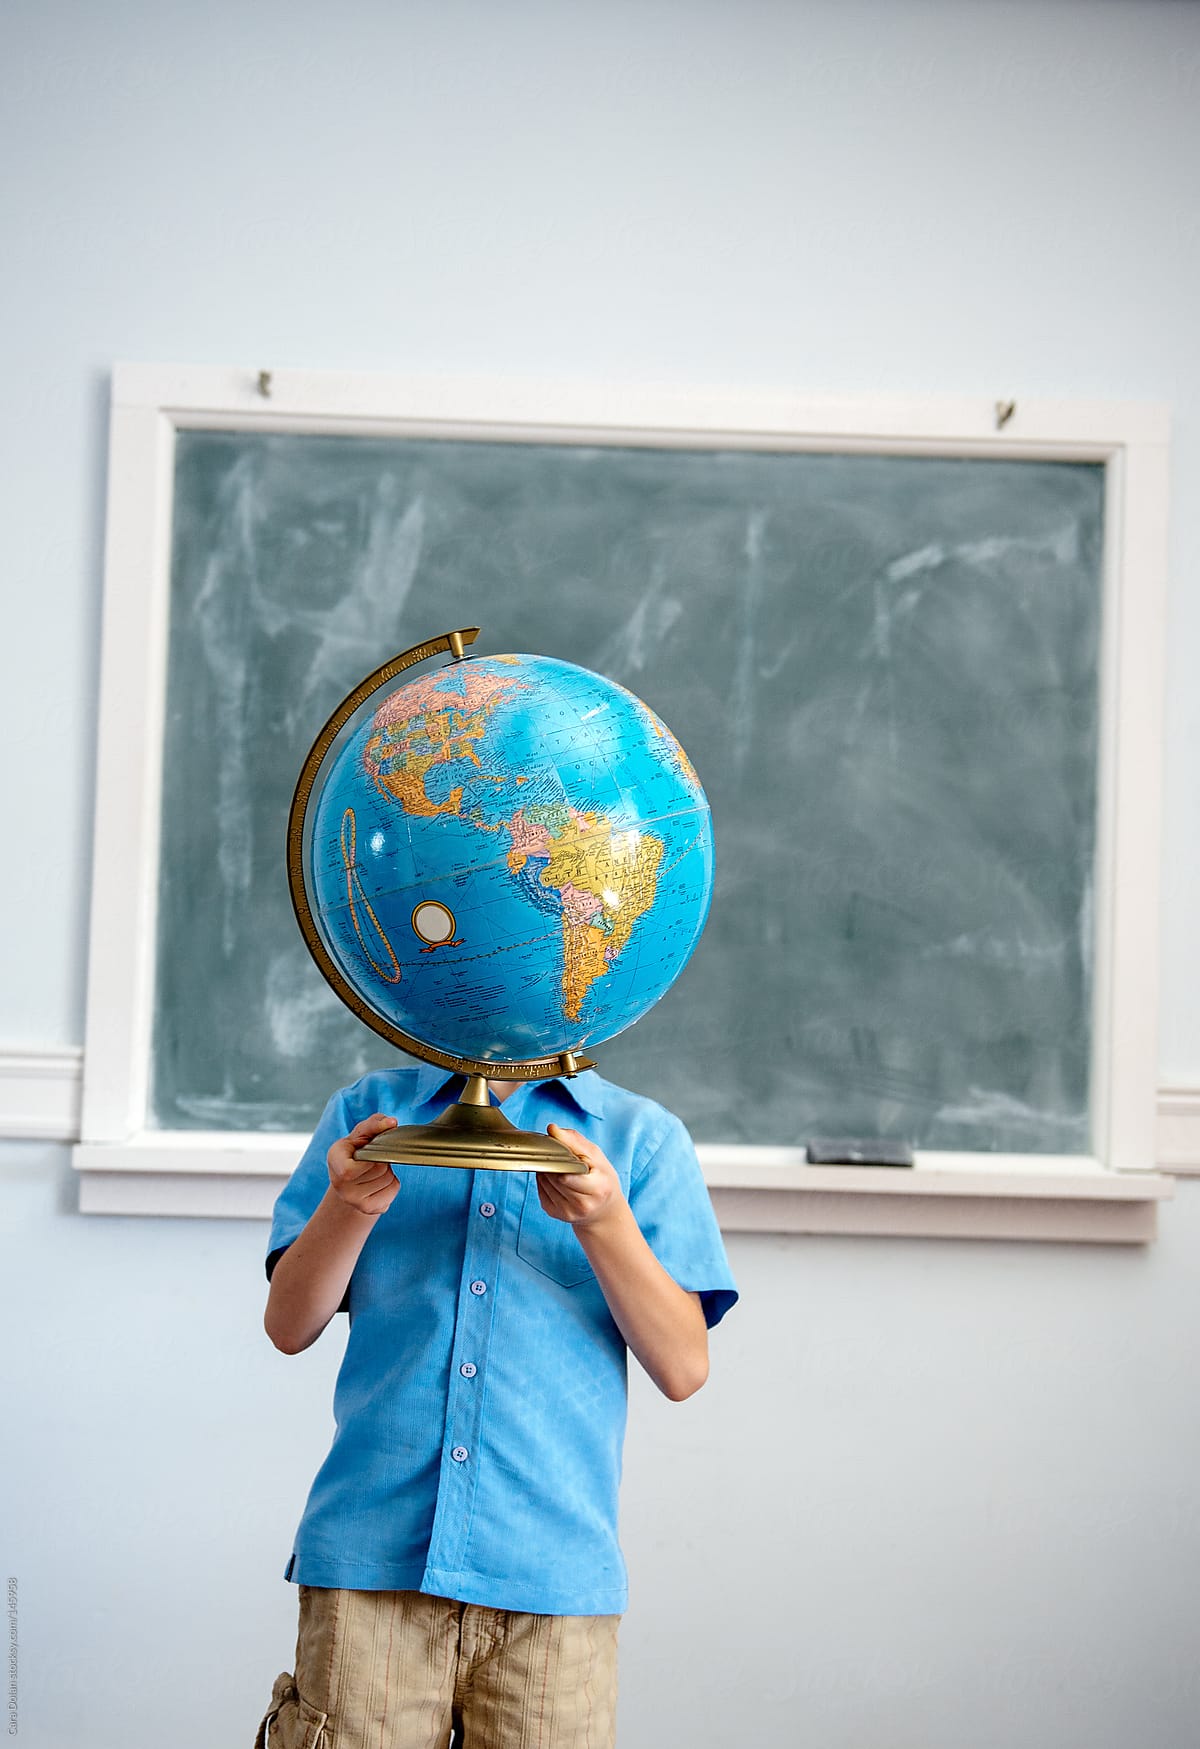 Student standing in classroom holds a globe up, covering his face